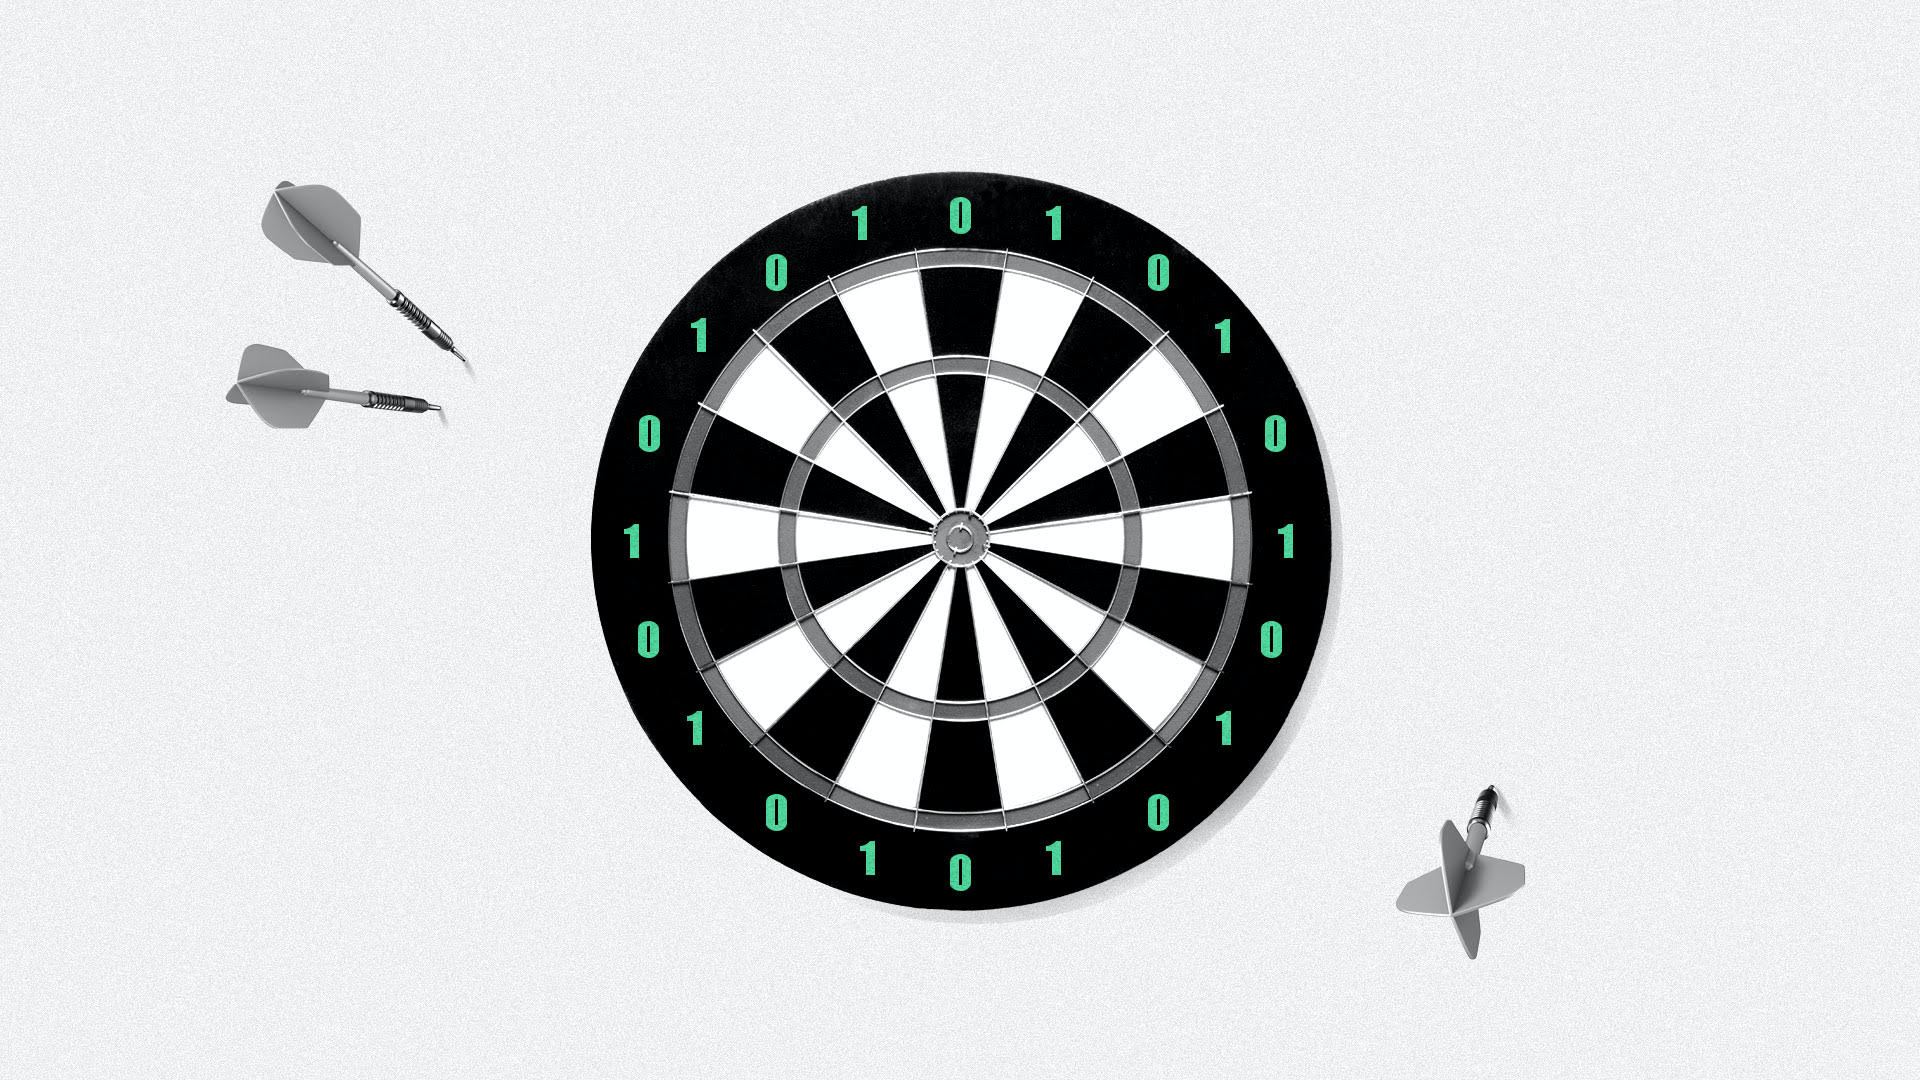 Illustration of a dart board with 1’s and 0’s. The darts have landed off the board.